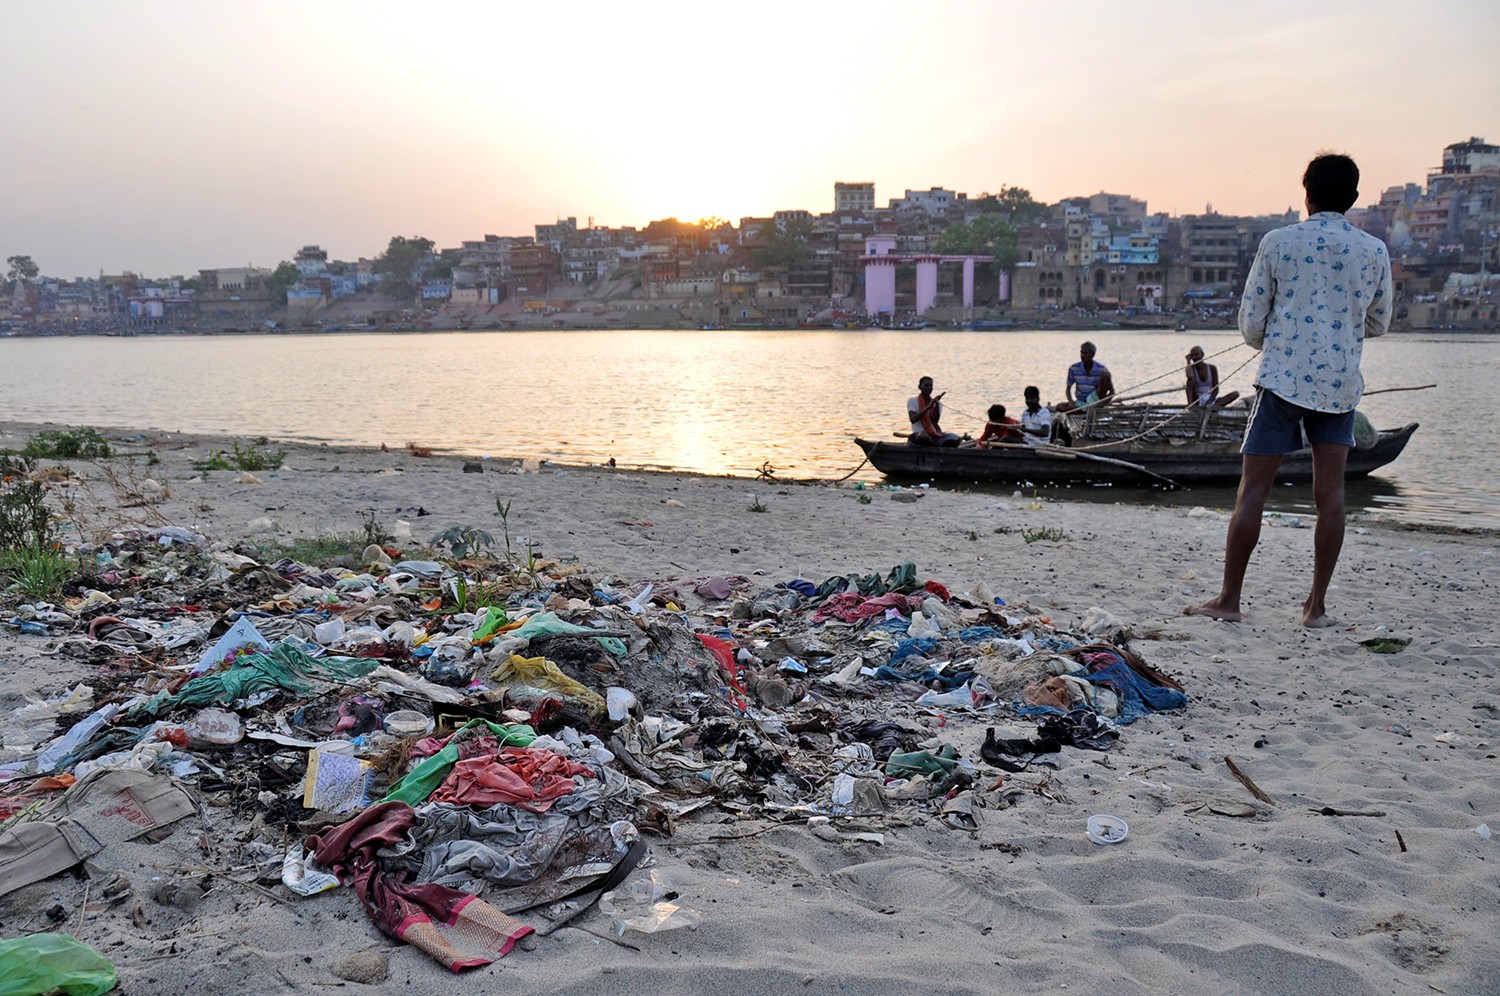 Garbage by the Ganges River in India